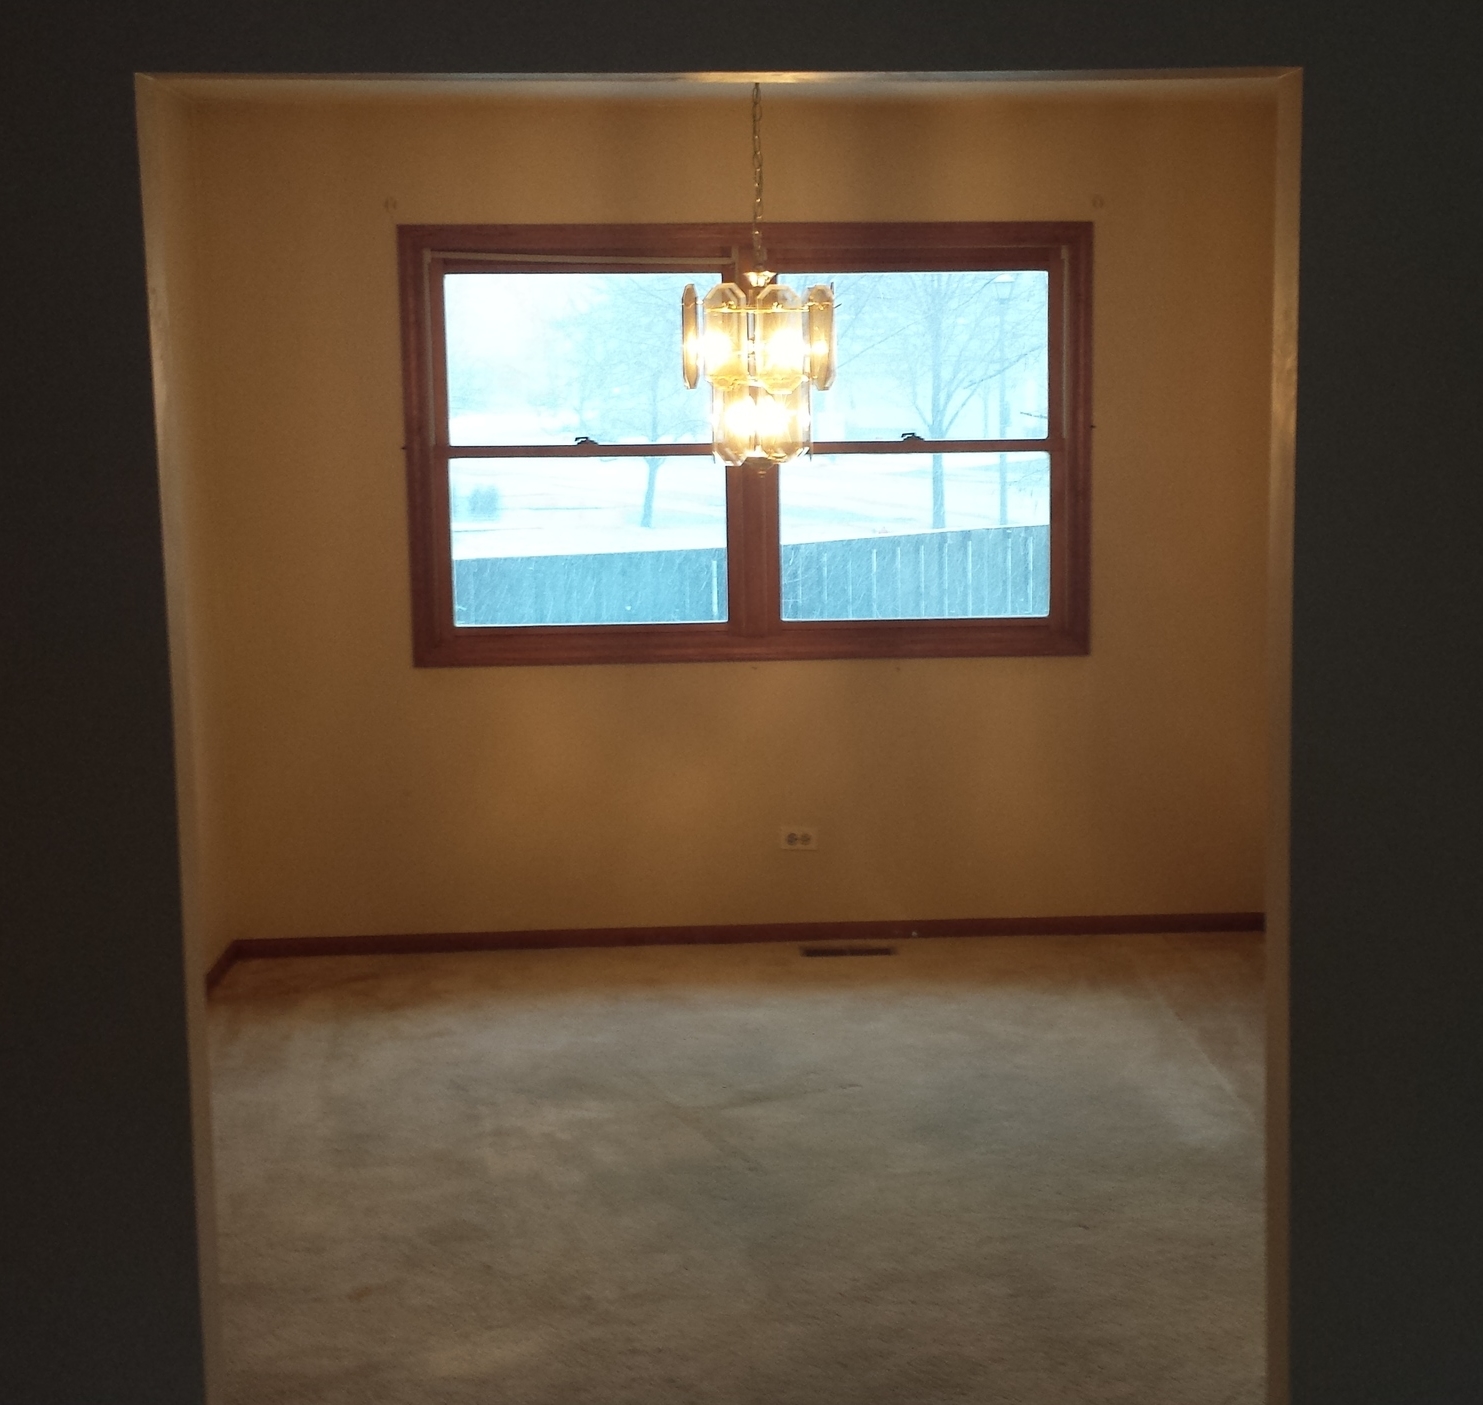 Existing dining room